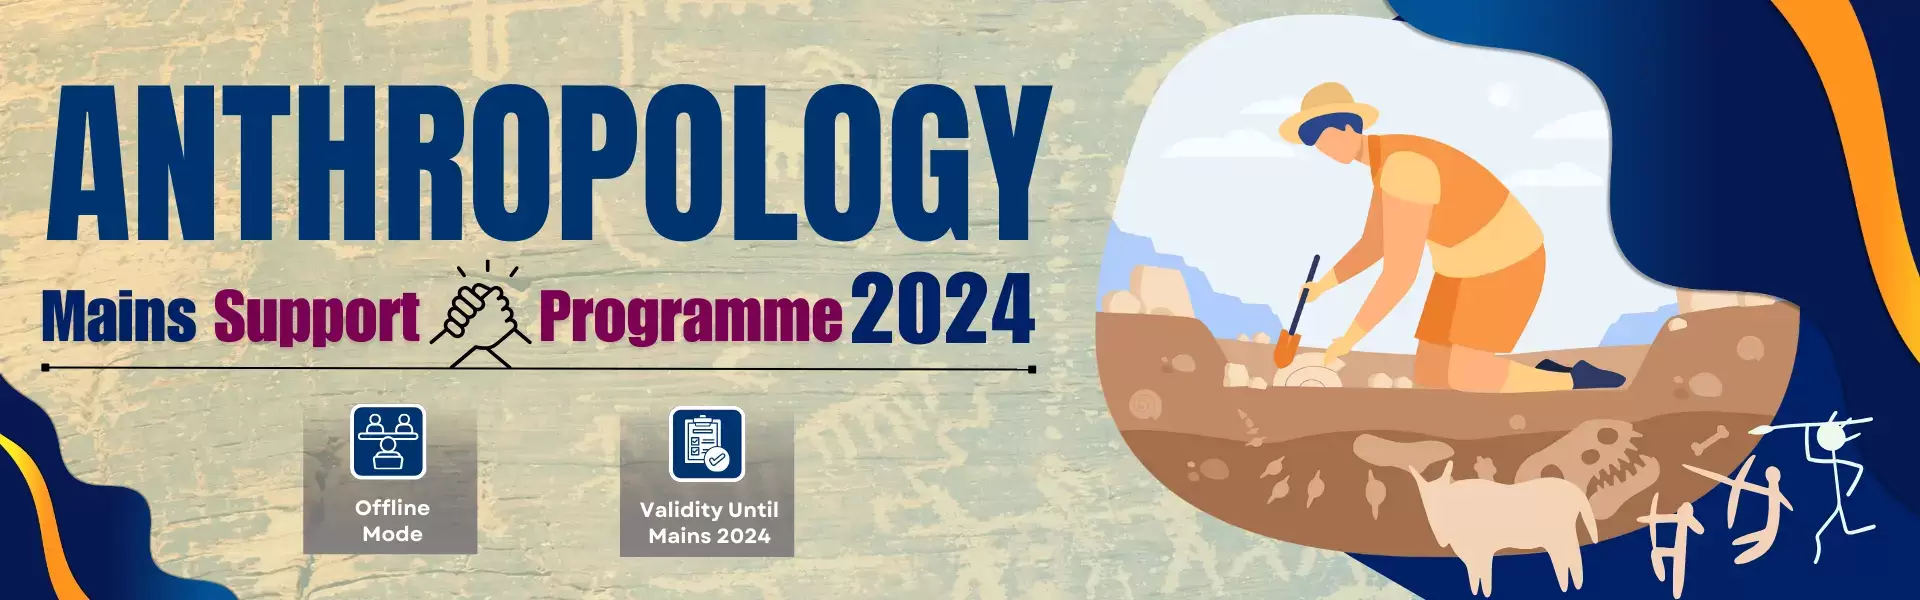 Anthropology Mains Support Programme 2024